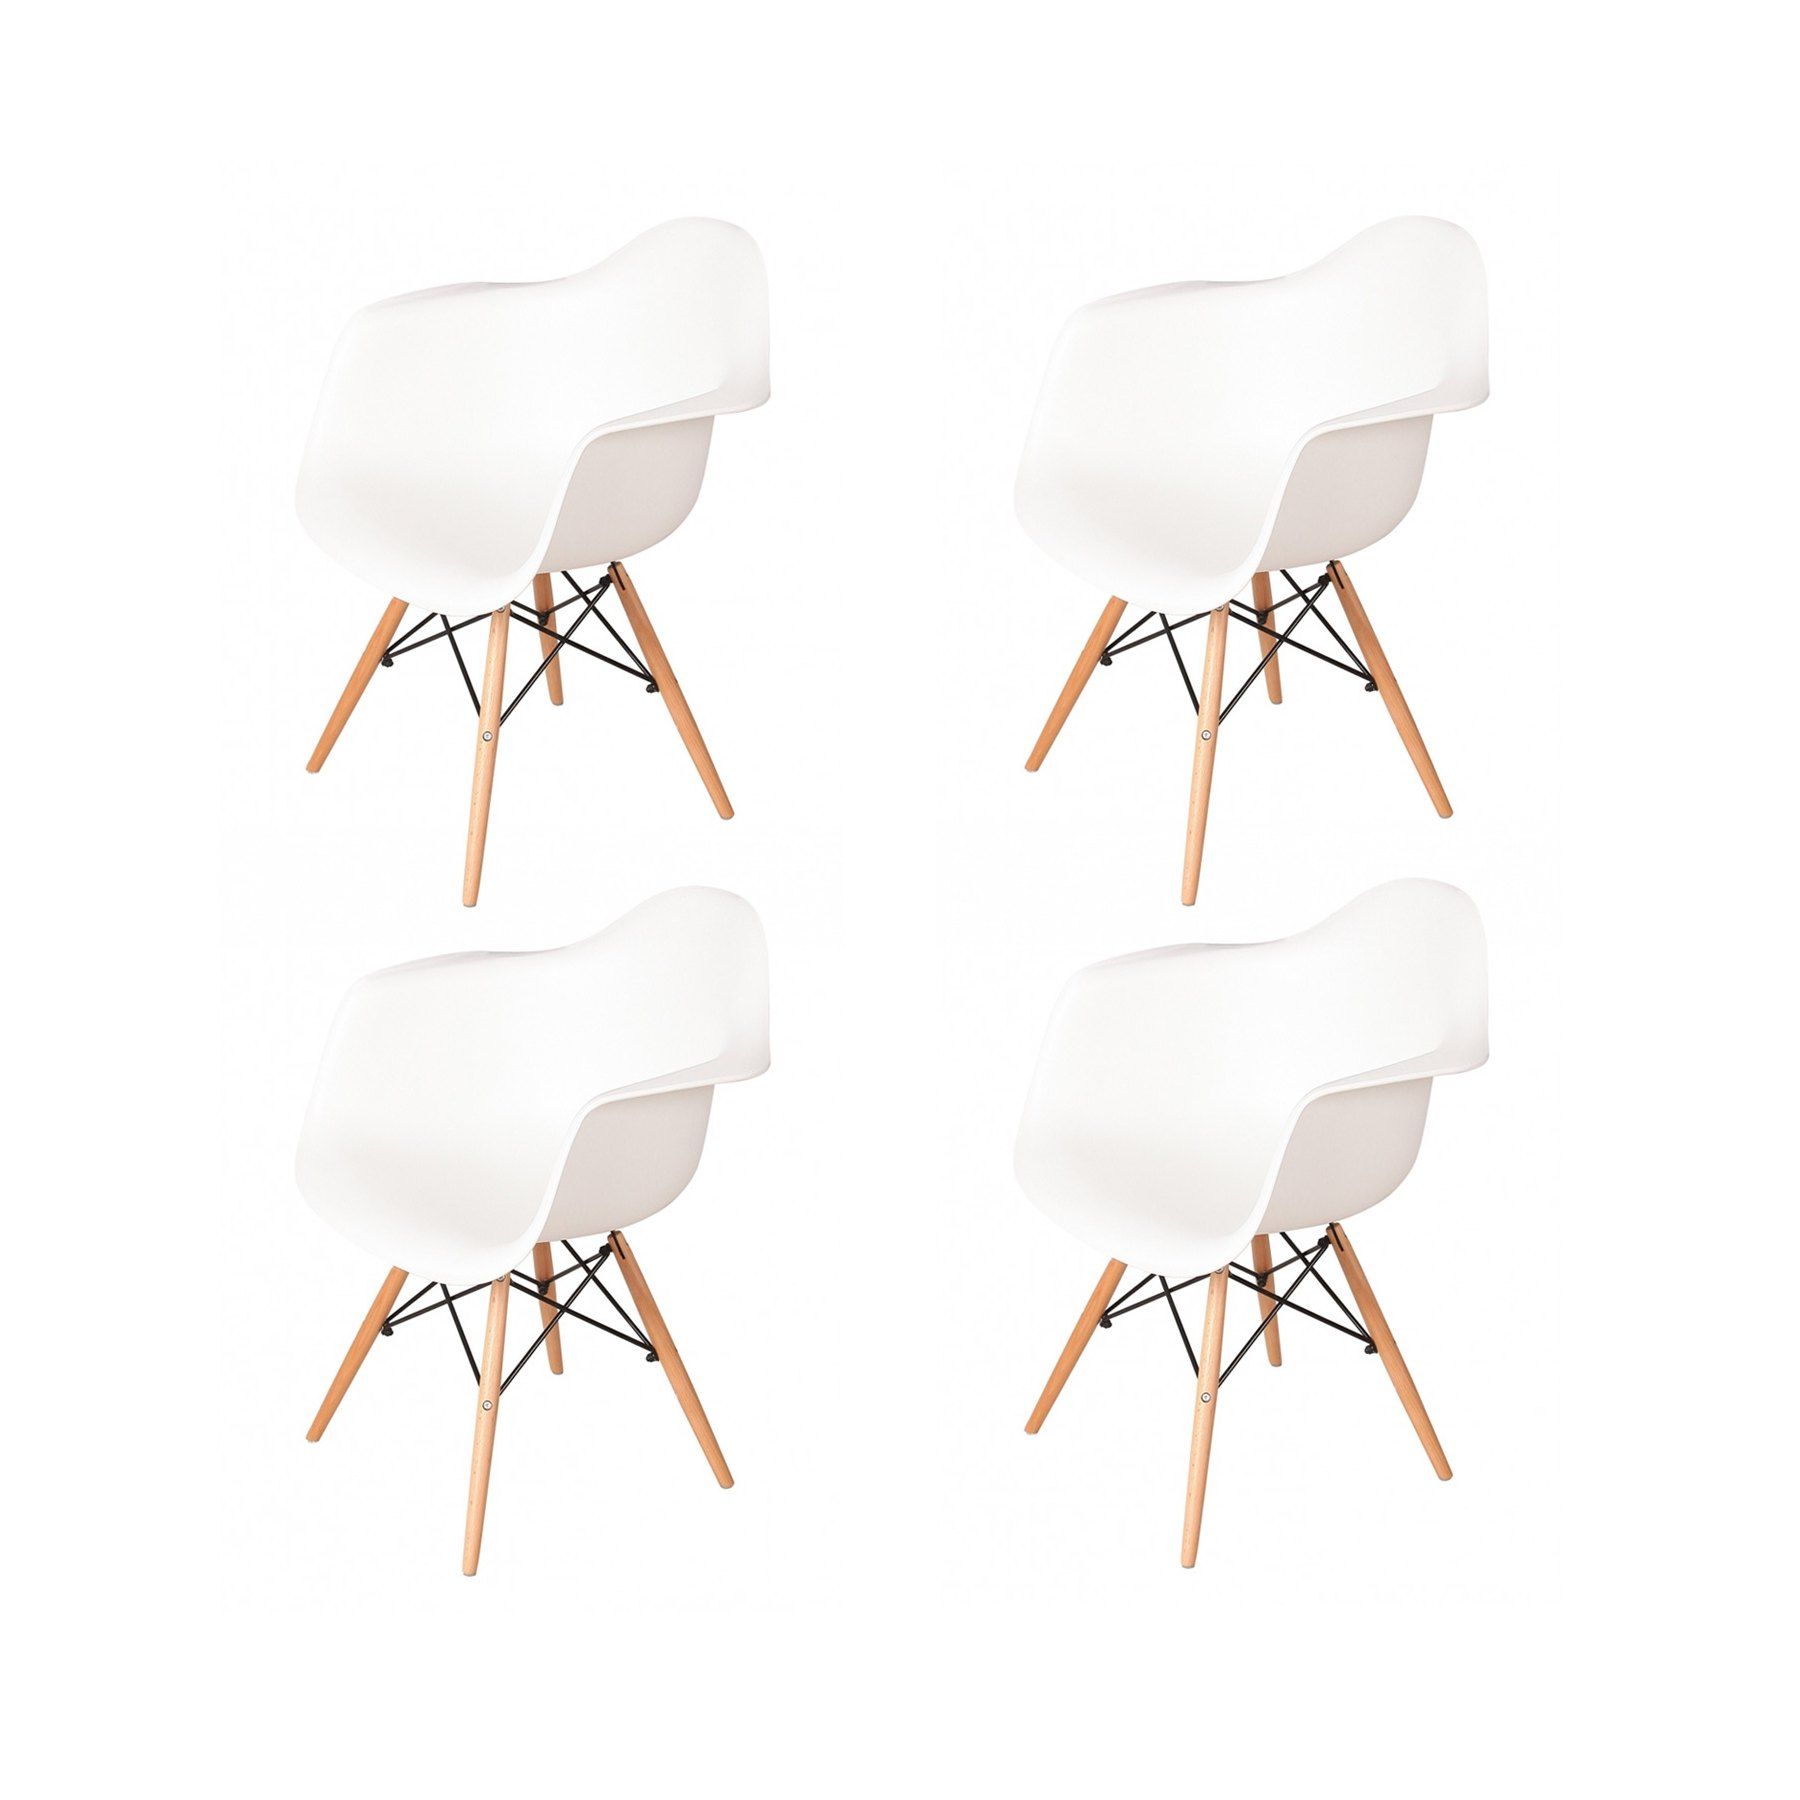 PACK 4 SILLONES TOWER WOOD BLANCOS